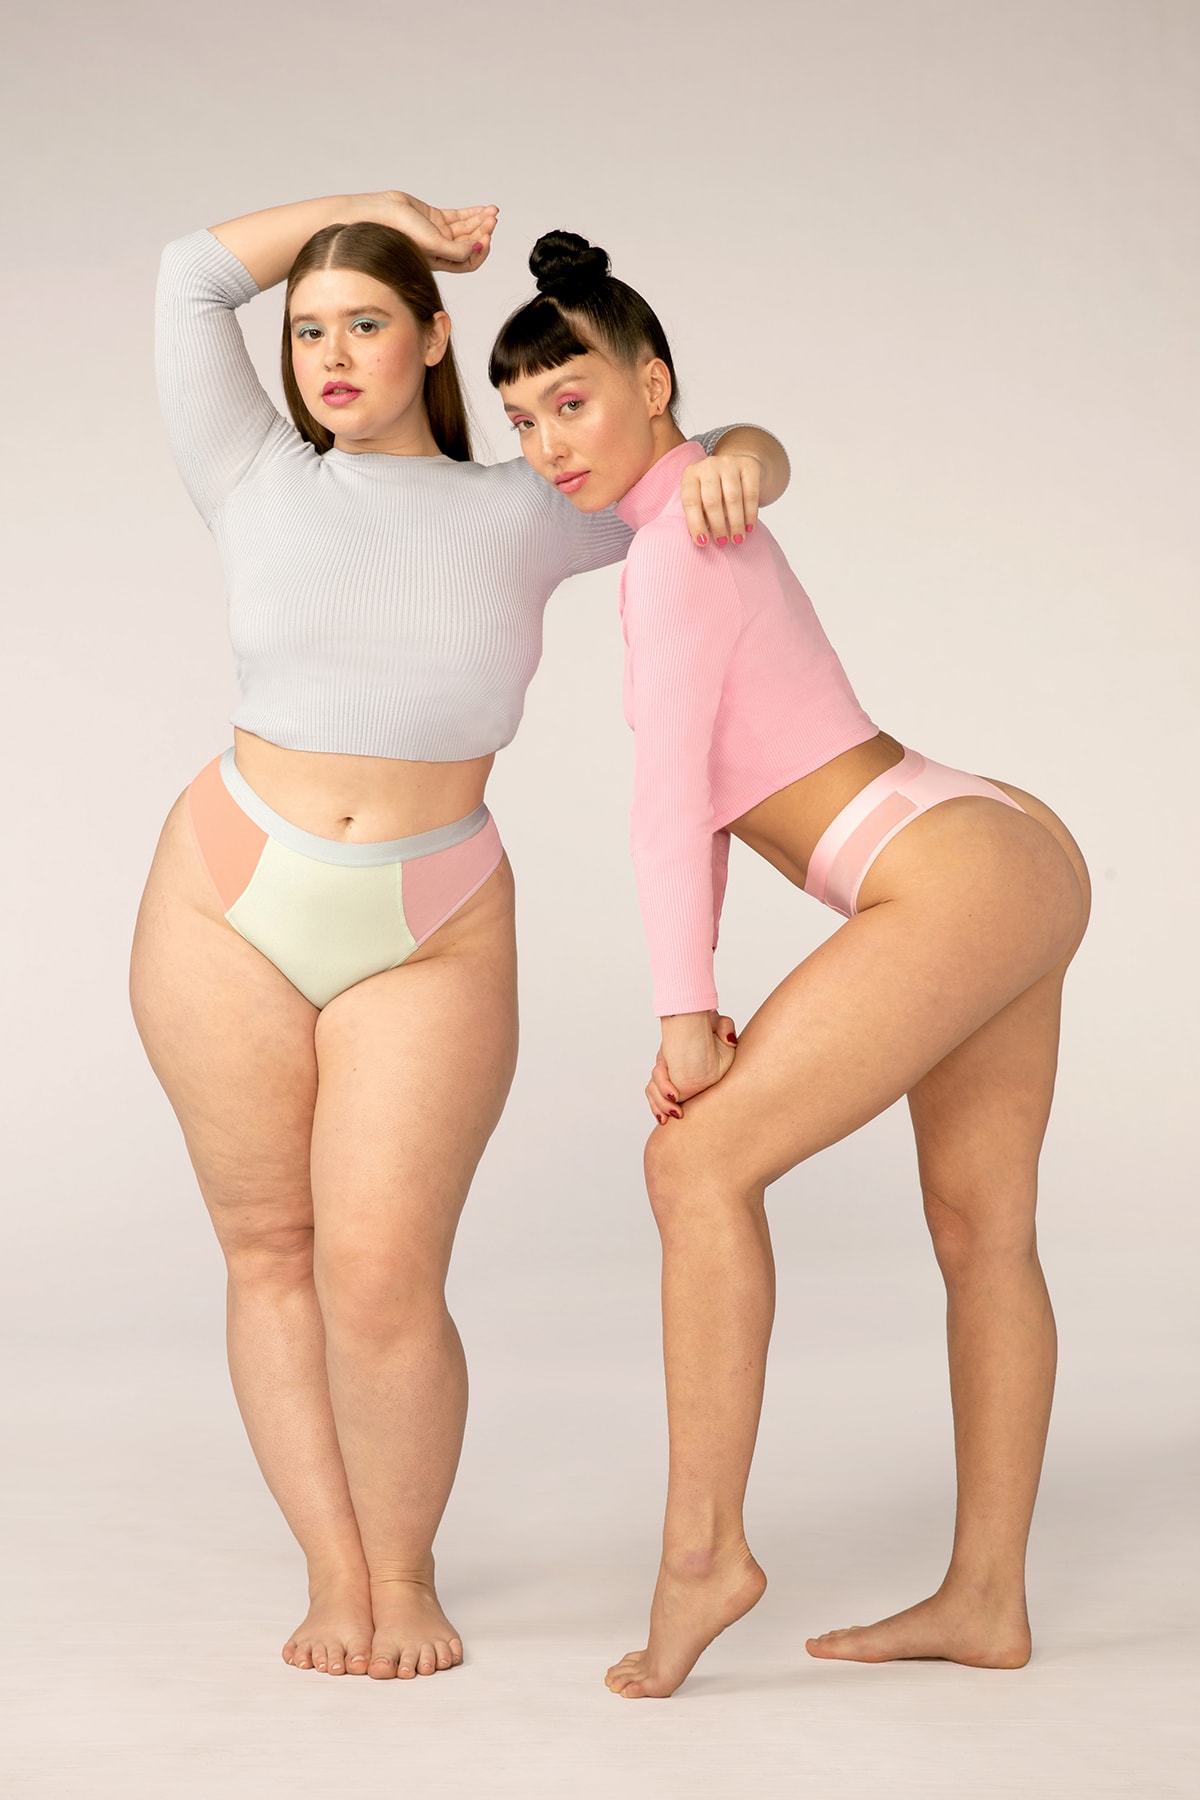 Parade Underwear Cotton Candy Collection Campaign